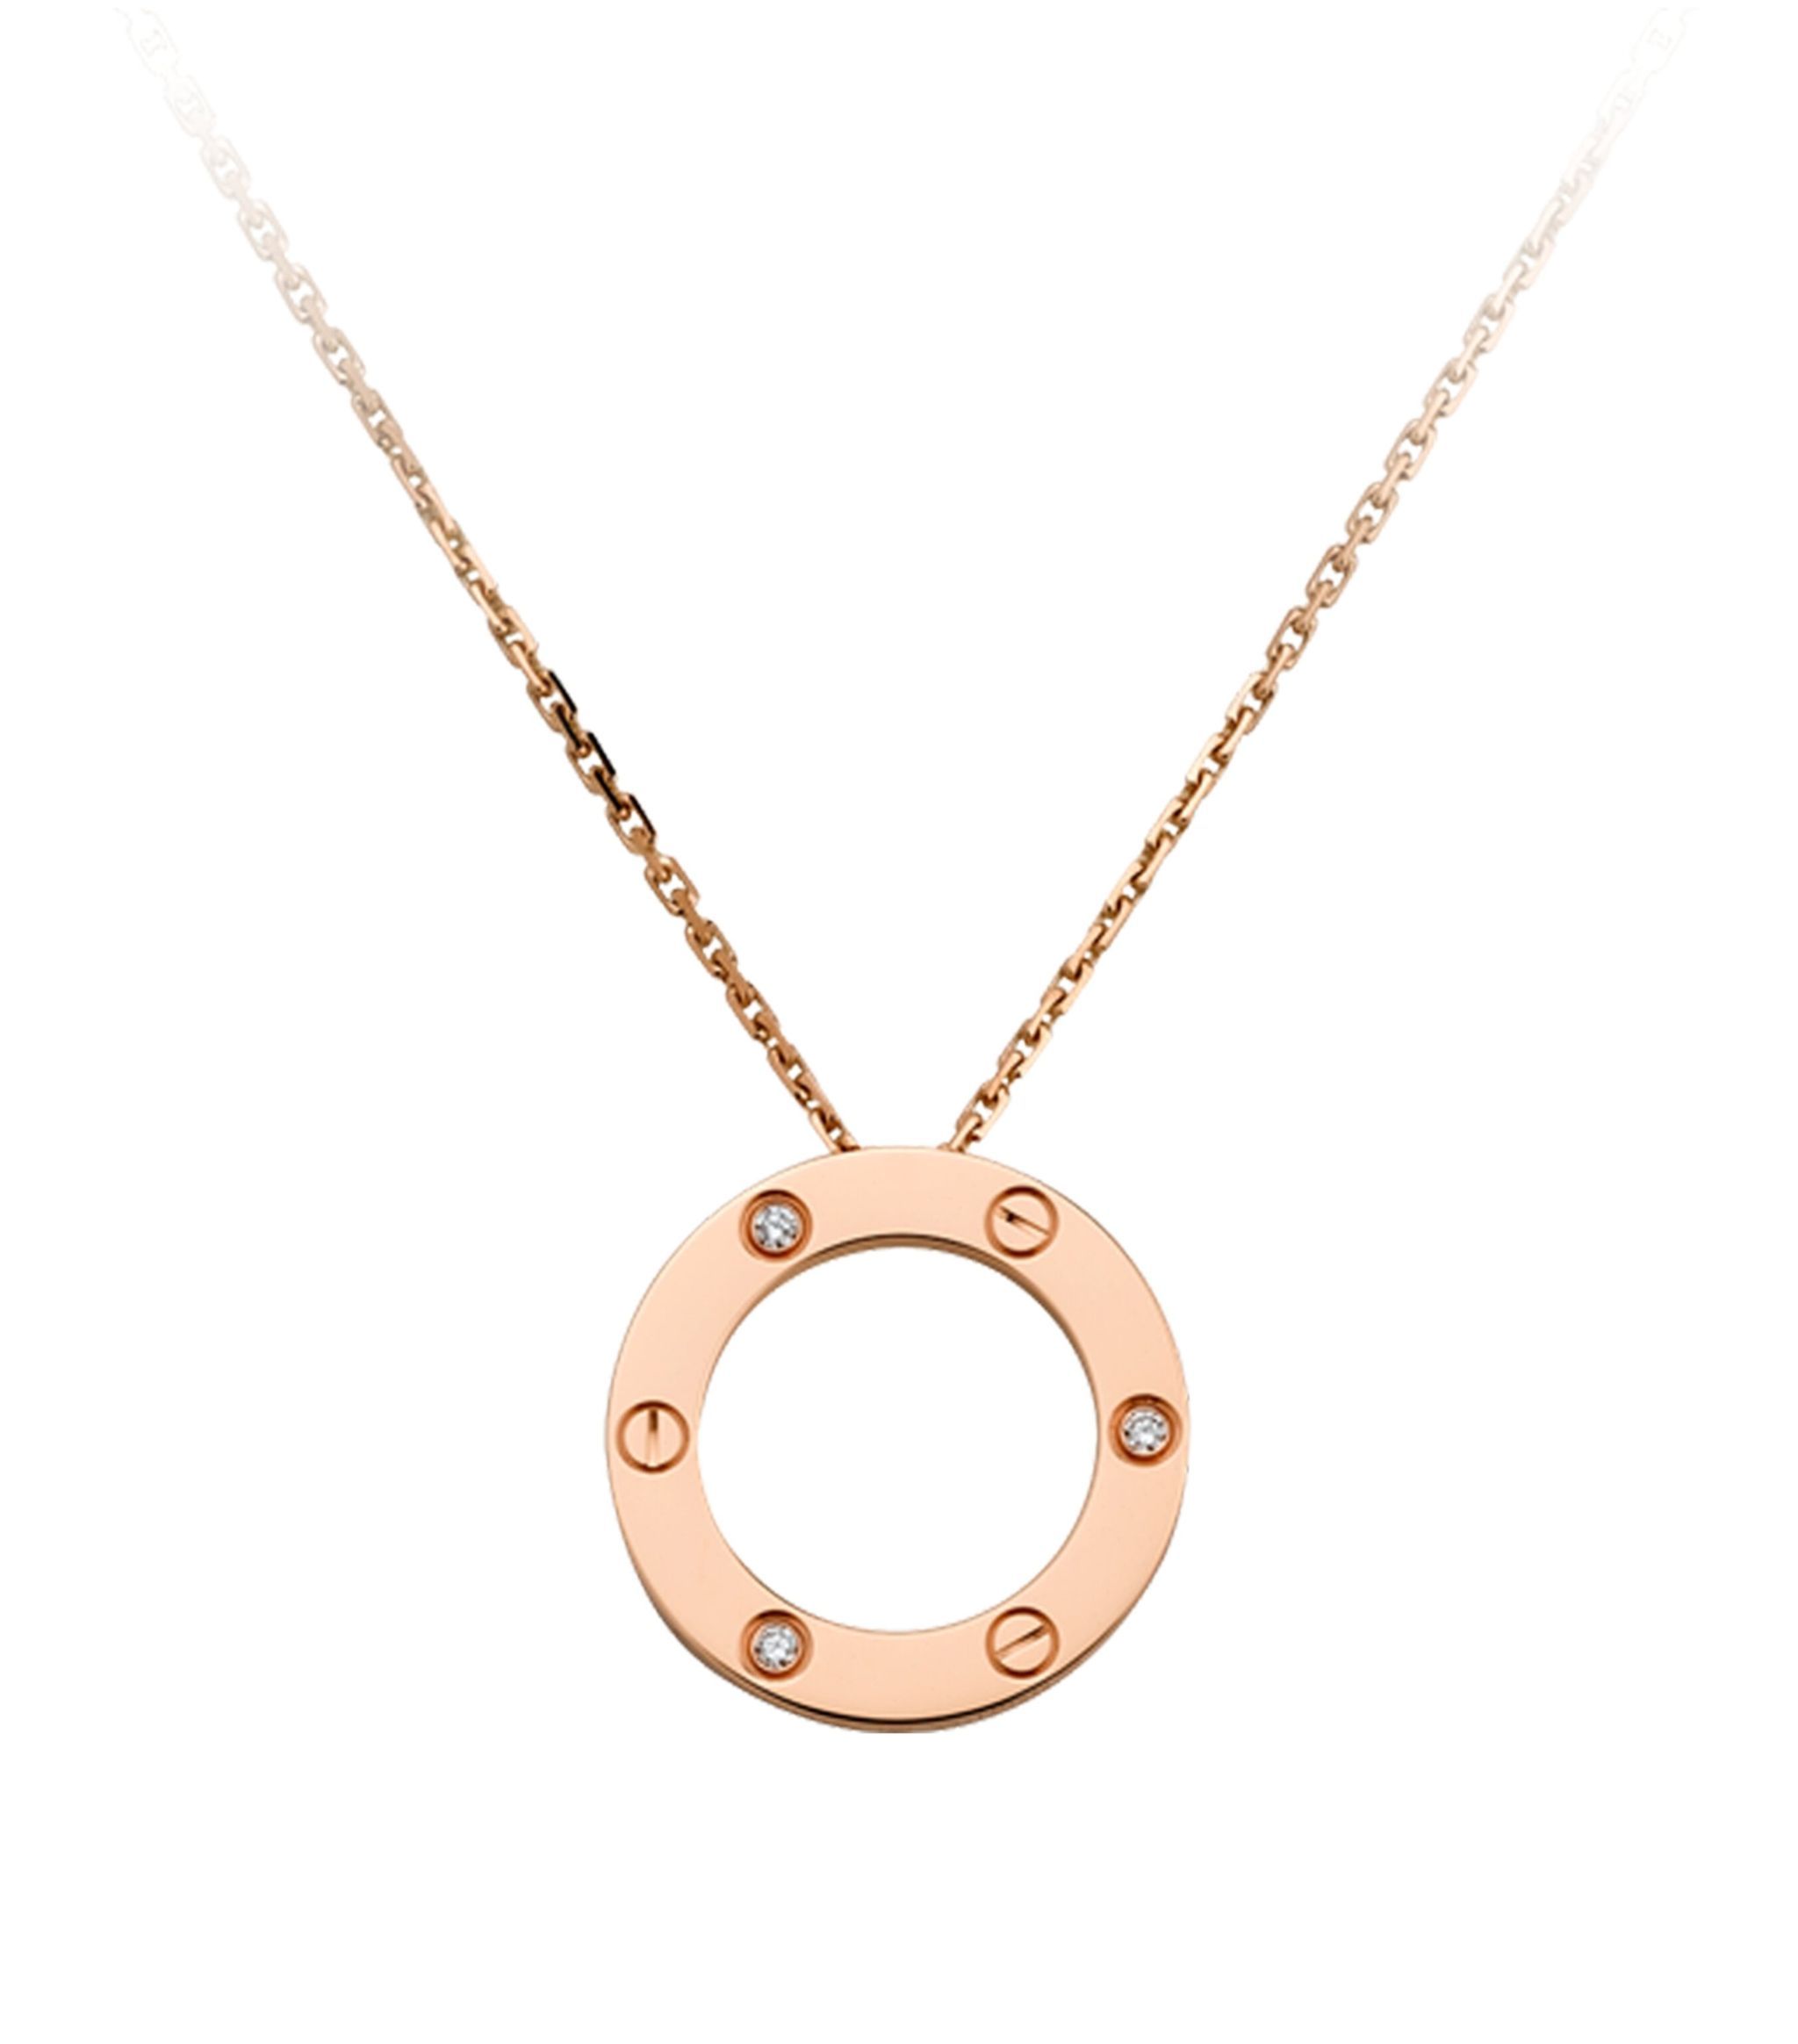 Rose Gold and Diamond Love Necklace | Harrods